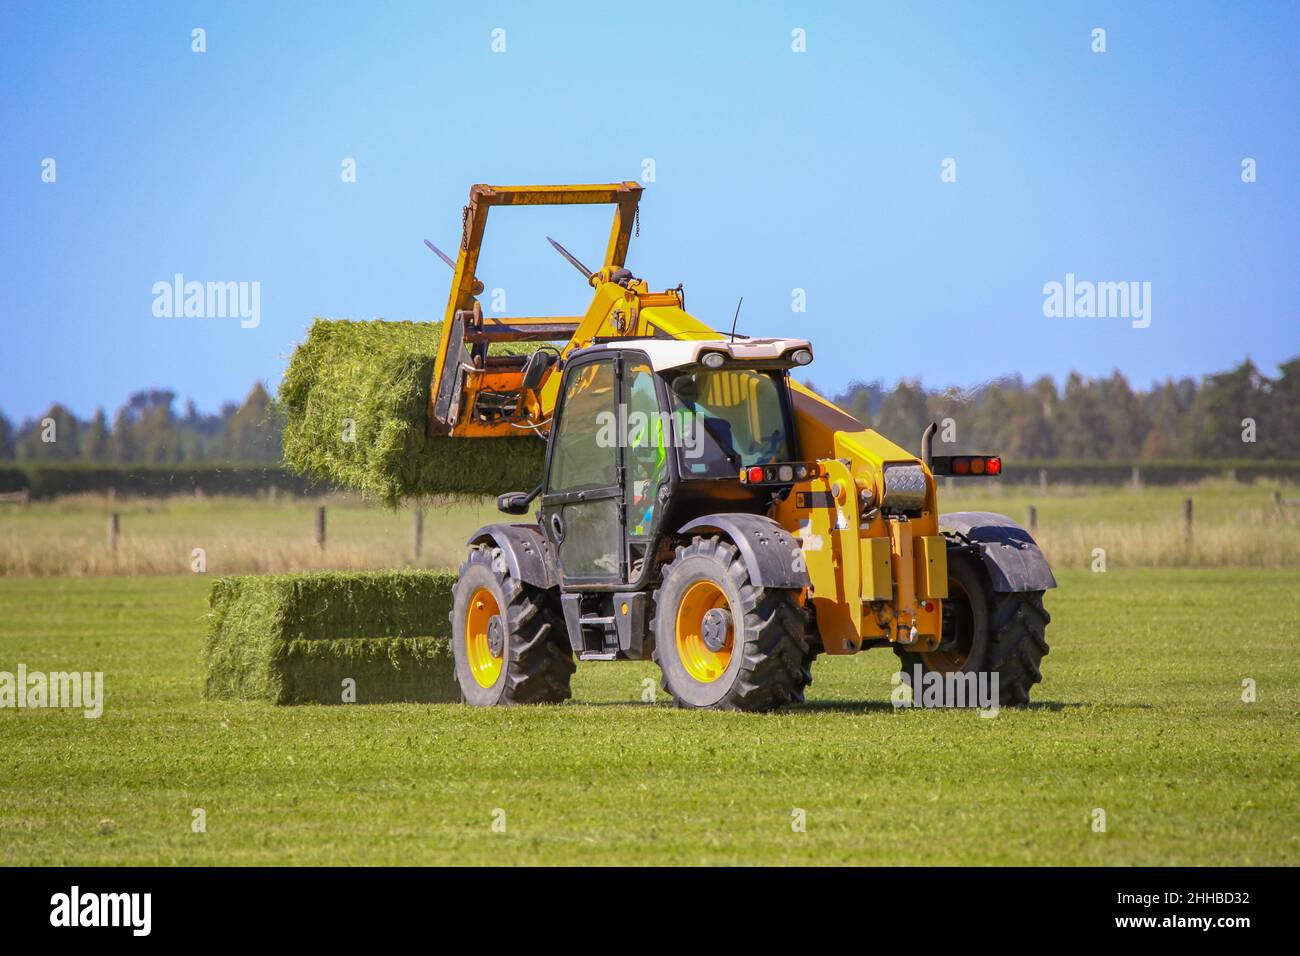 A telehandler works stacking hay bales on a farm in rural Canterbury, New Zealand Stock Photo